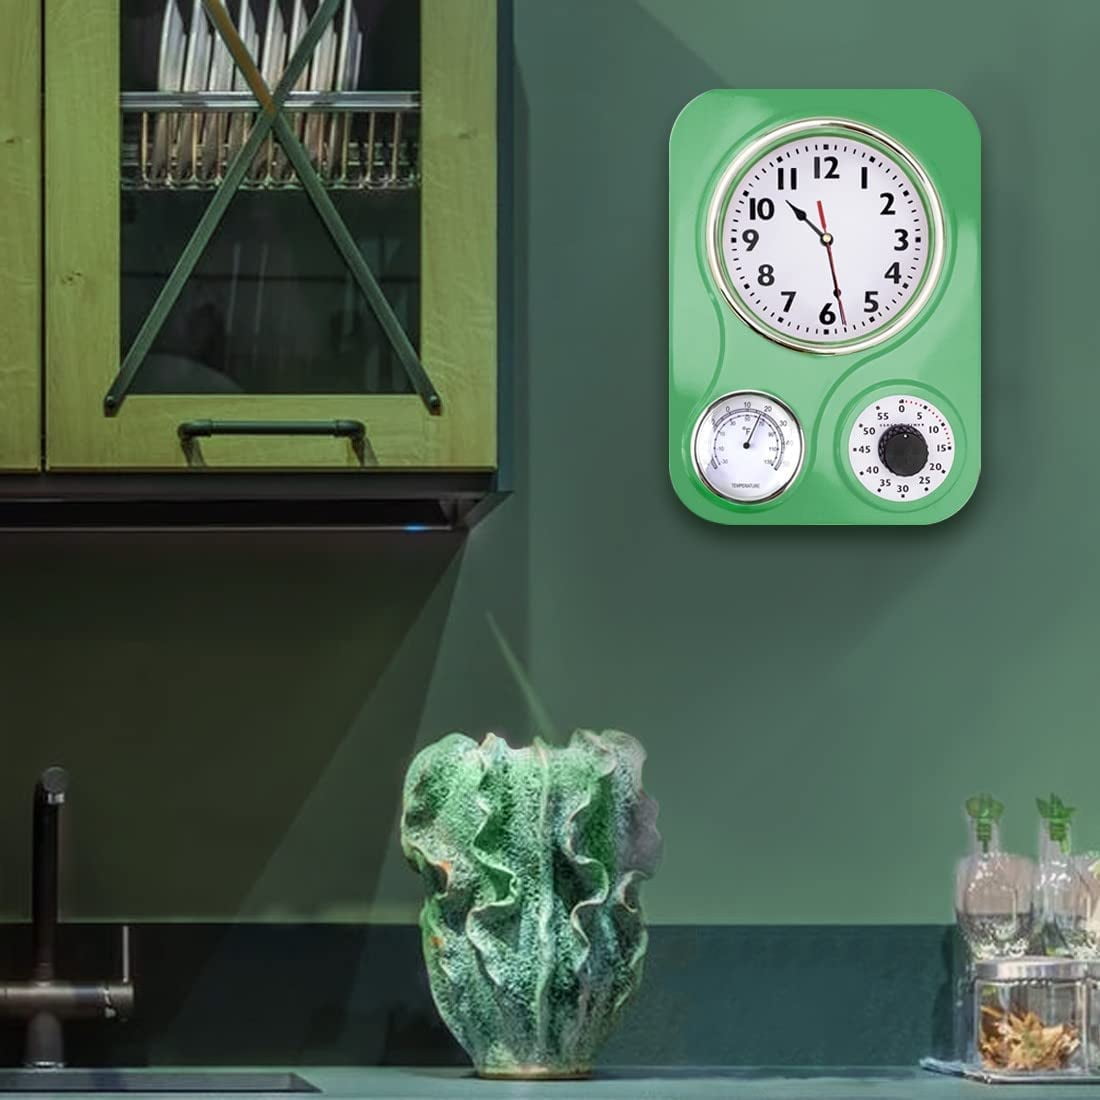 Lily's Home Retro Kitchen Wall Clock, with a Thermometer and 60